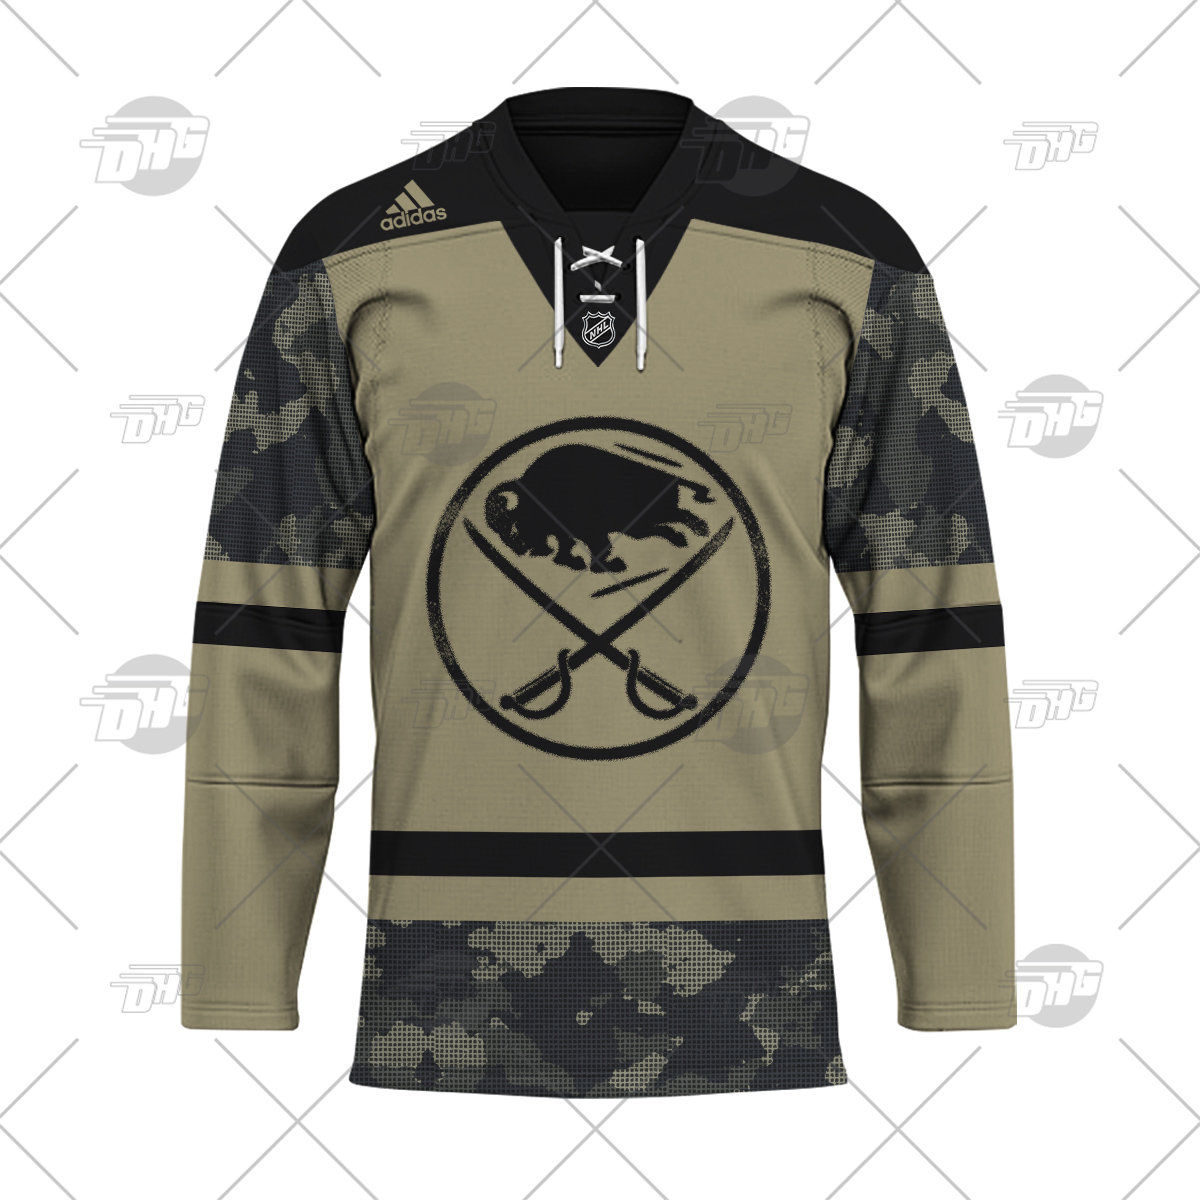 Personalized NHL Men's Pittsburgh Penguins 2022 Gold Alternate Jersey -  OldSchoolThings - Personalize Your Own New & Retro Sports Jerseys, Hoodies, T  Shirts